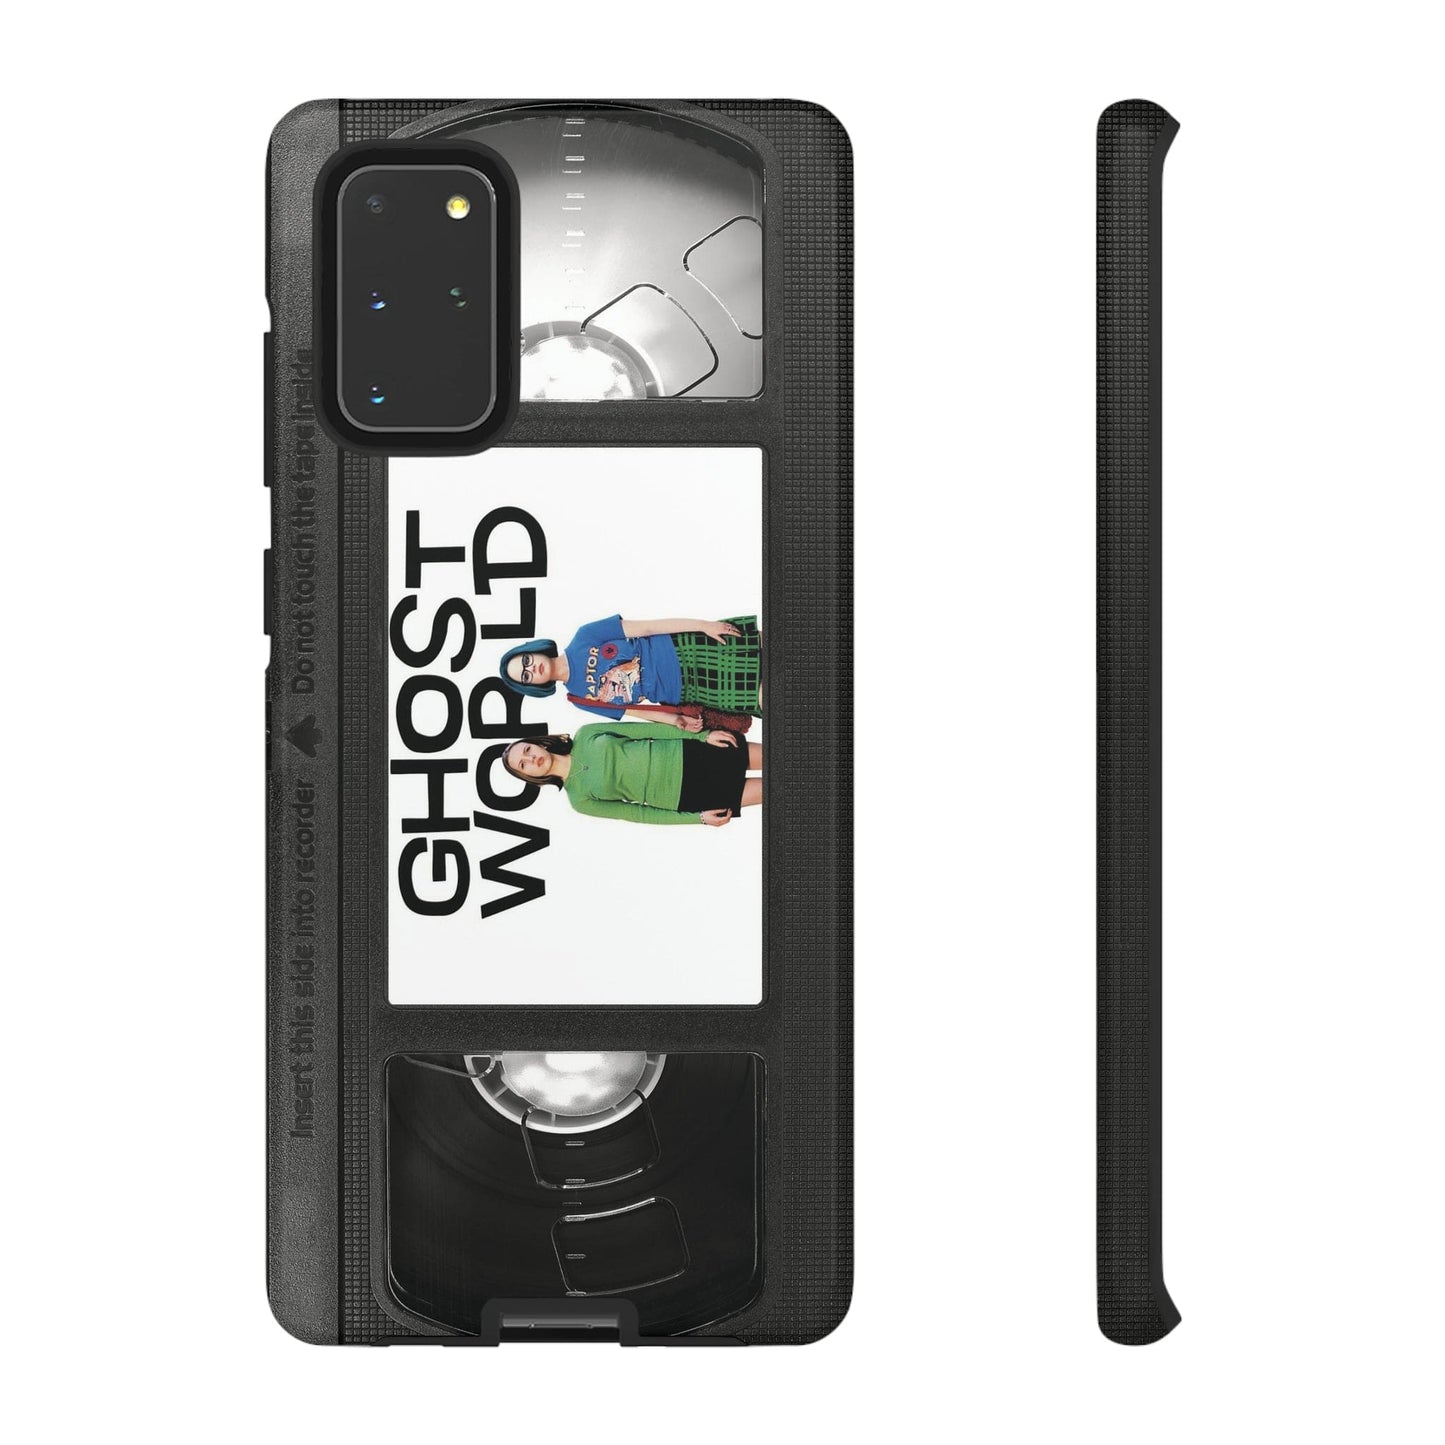 Ghost World VHS Phone Case